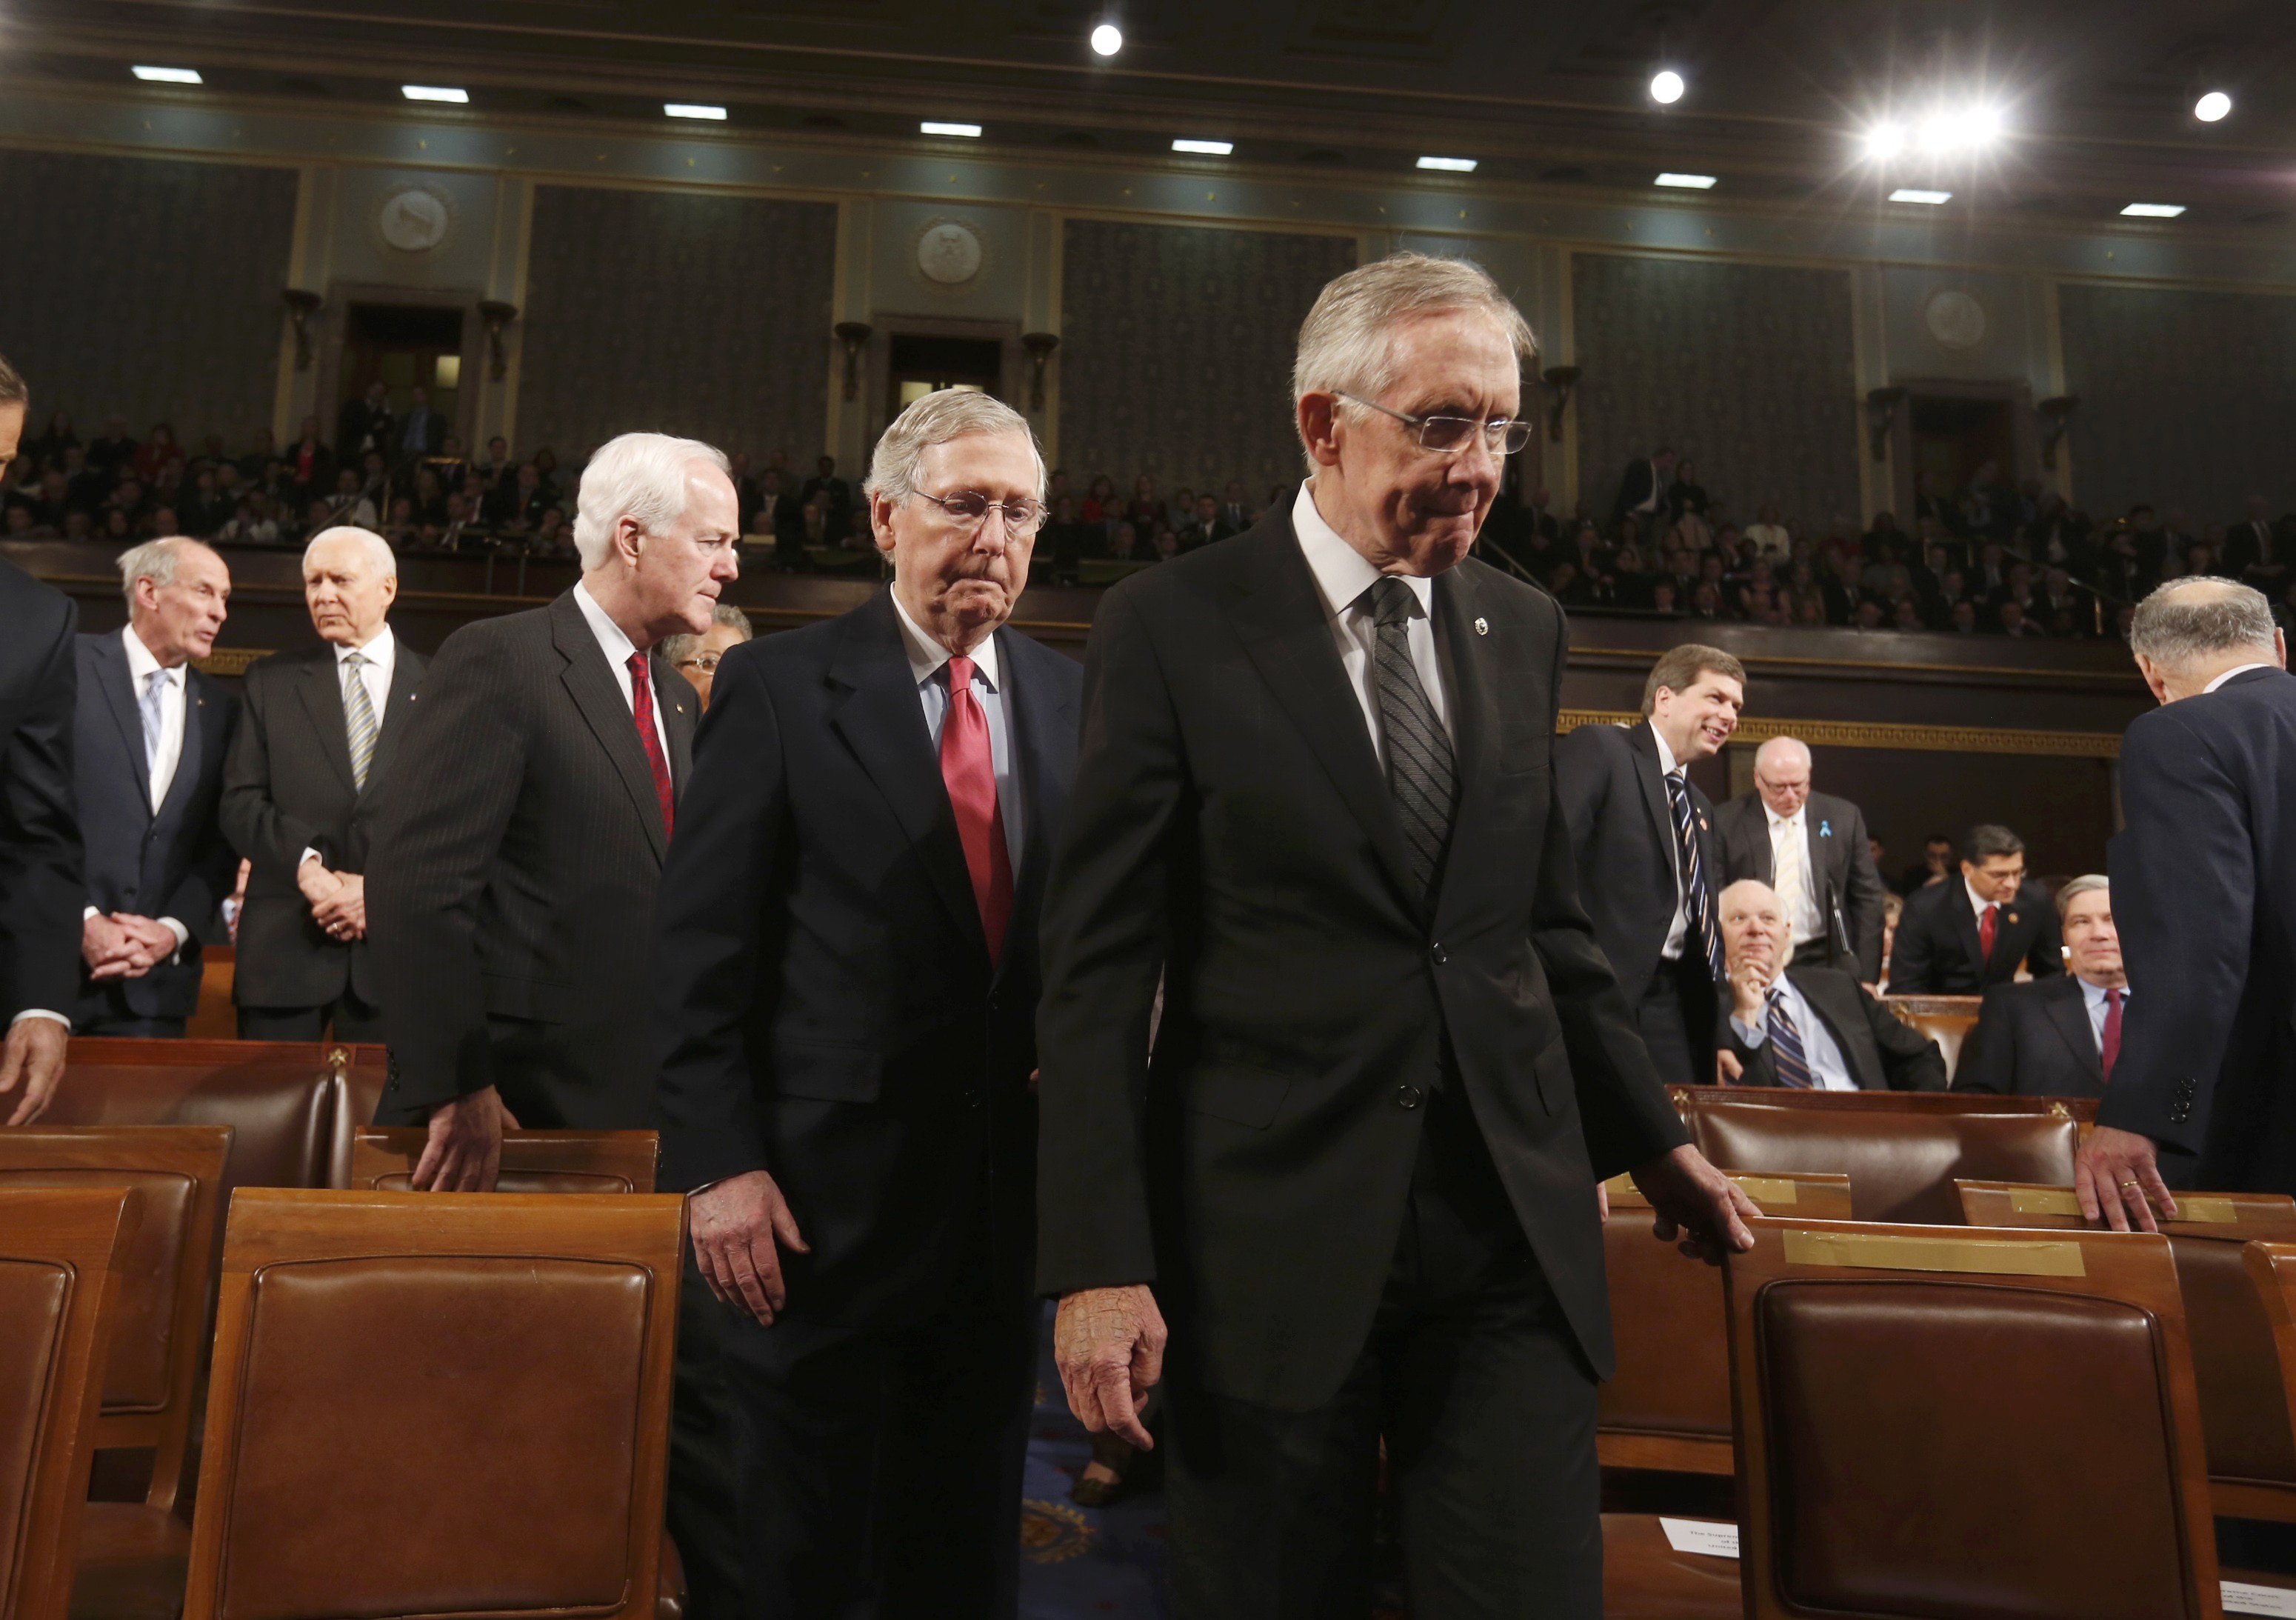 Senate Majority Leader Reid leads Senate Minority Leader McConnell and Minority Whip Cornyn to the front of the chamber before President Obama delivers his State of the Union speech in Washington